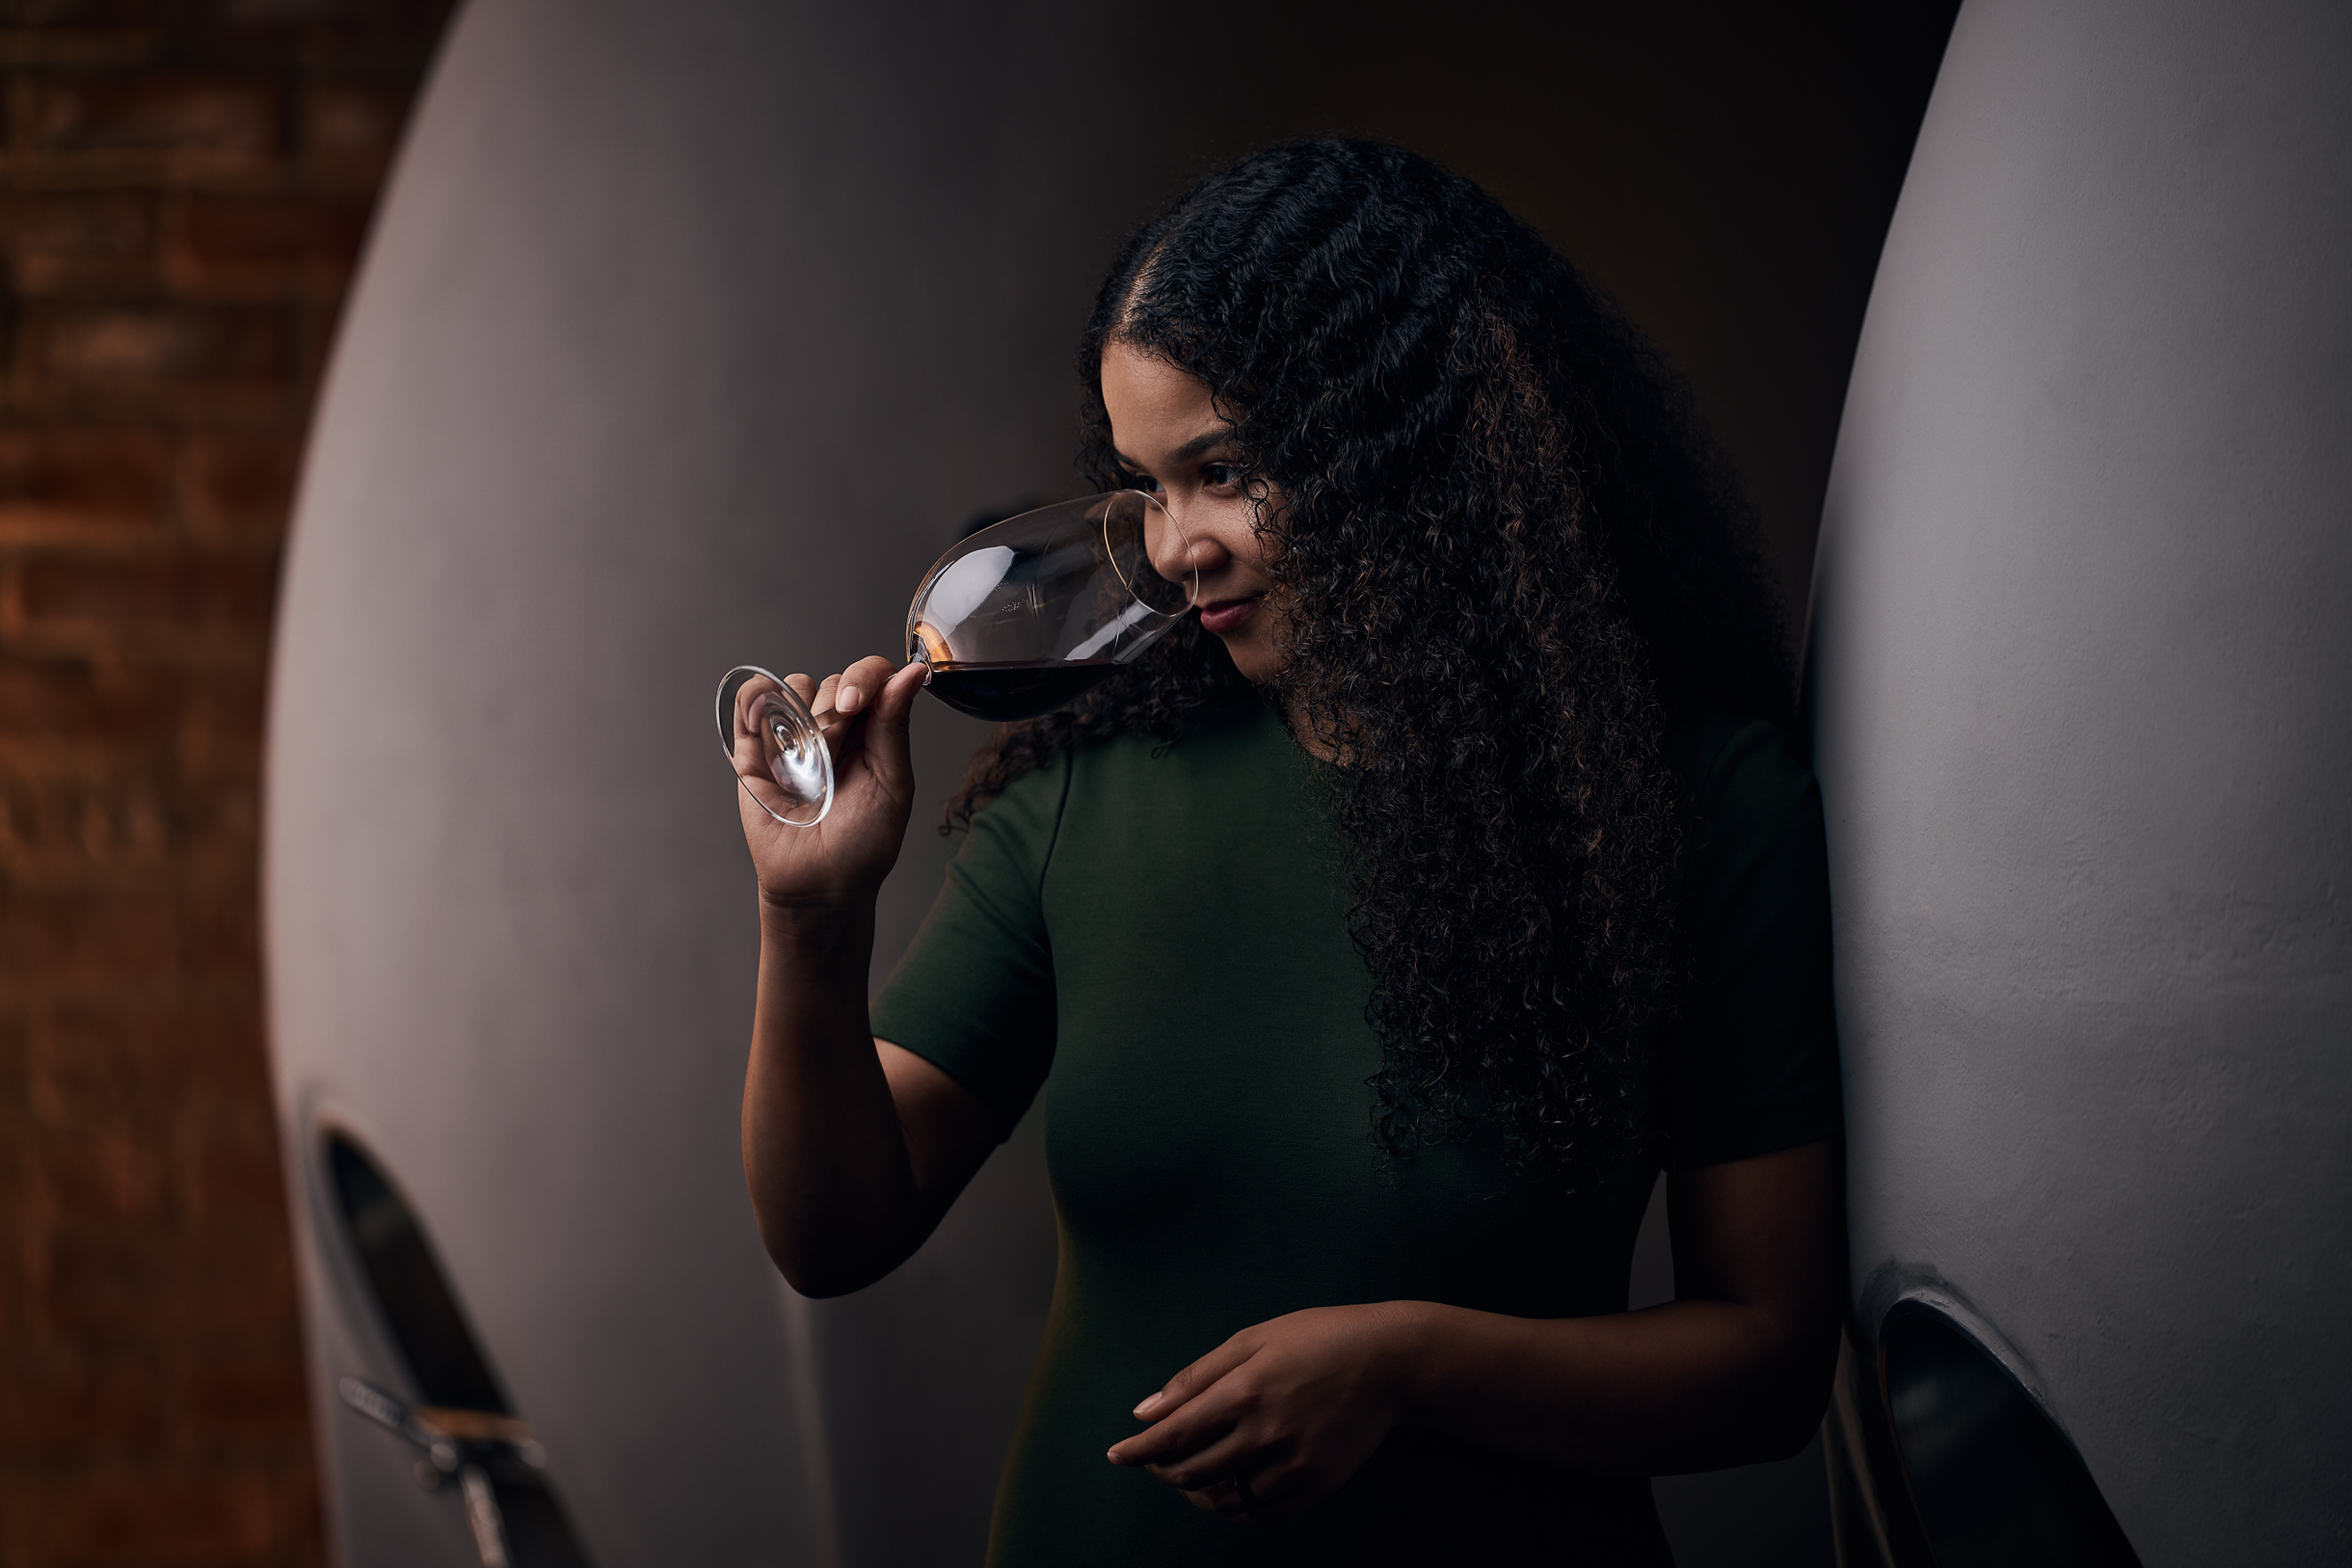 Meet Kiara Scott Farmer – one of South Africa’s youngest female winemakers